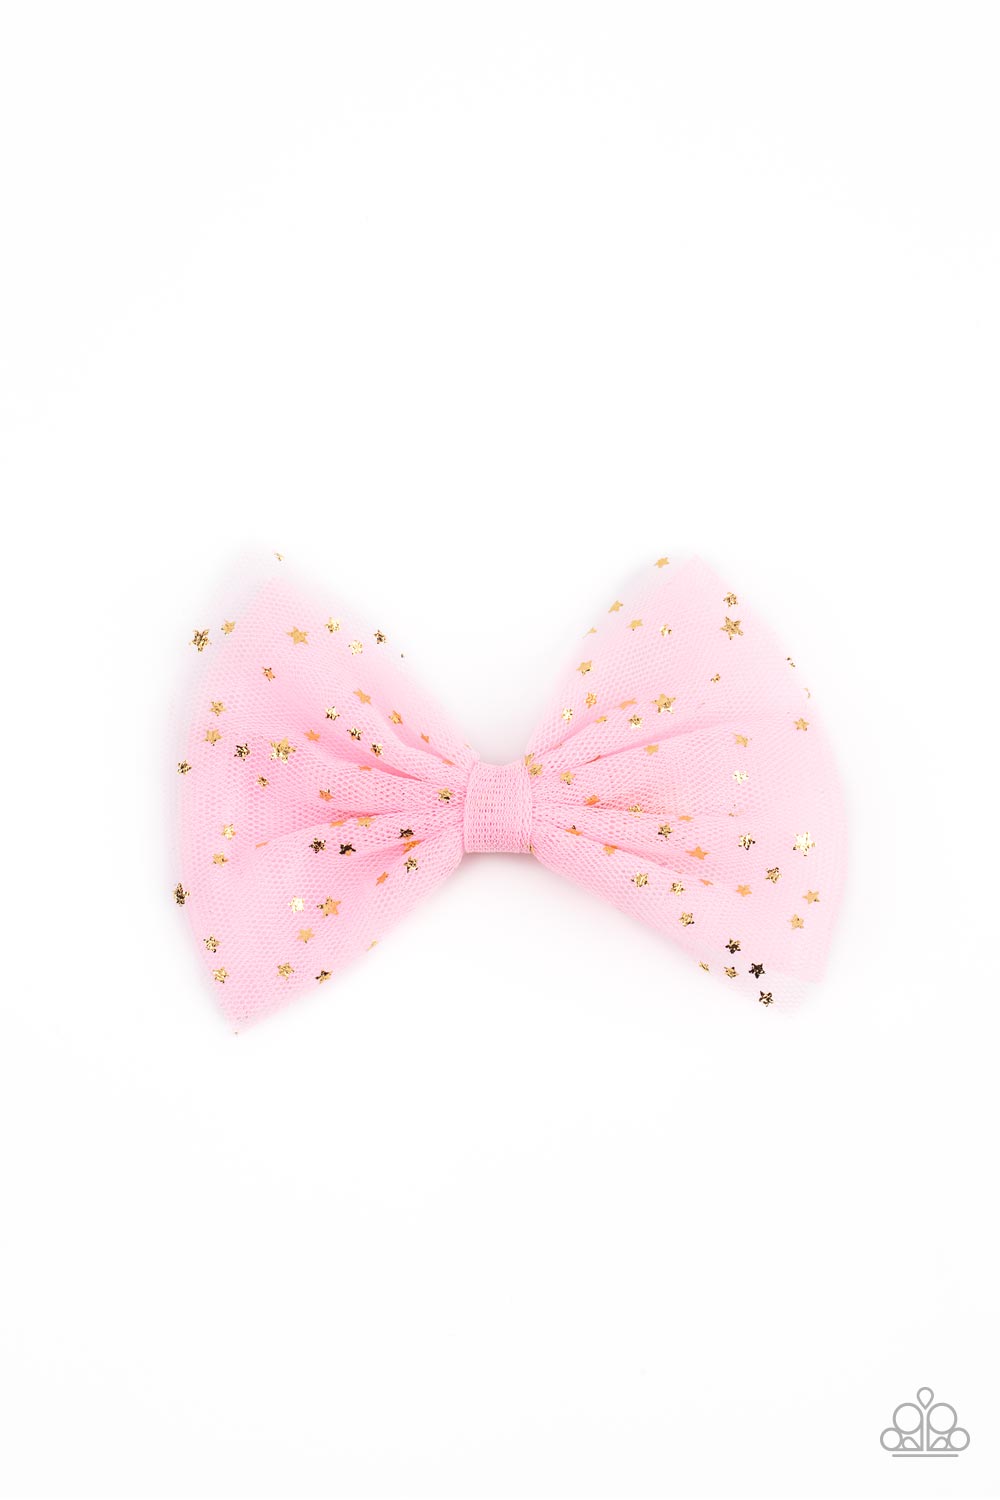 Paparazzi Accessories - Twinkly Tulle #HB49 - Pink Hair Accessories